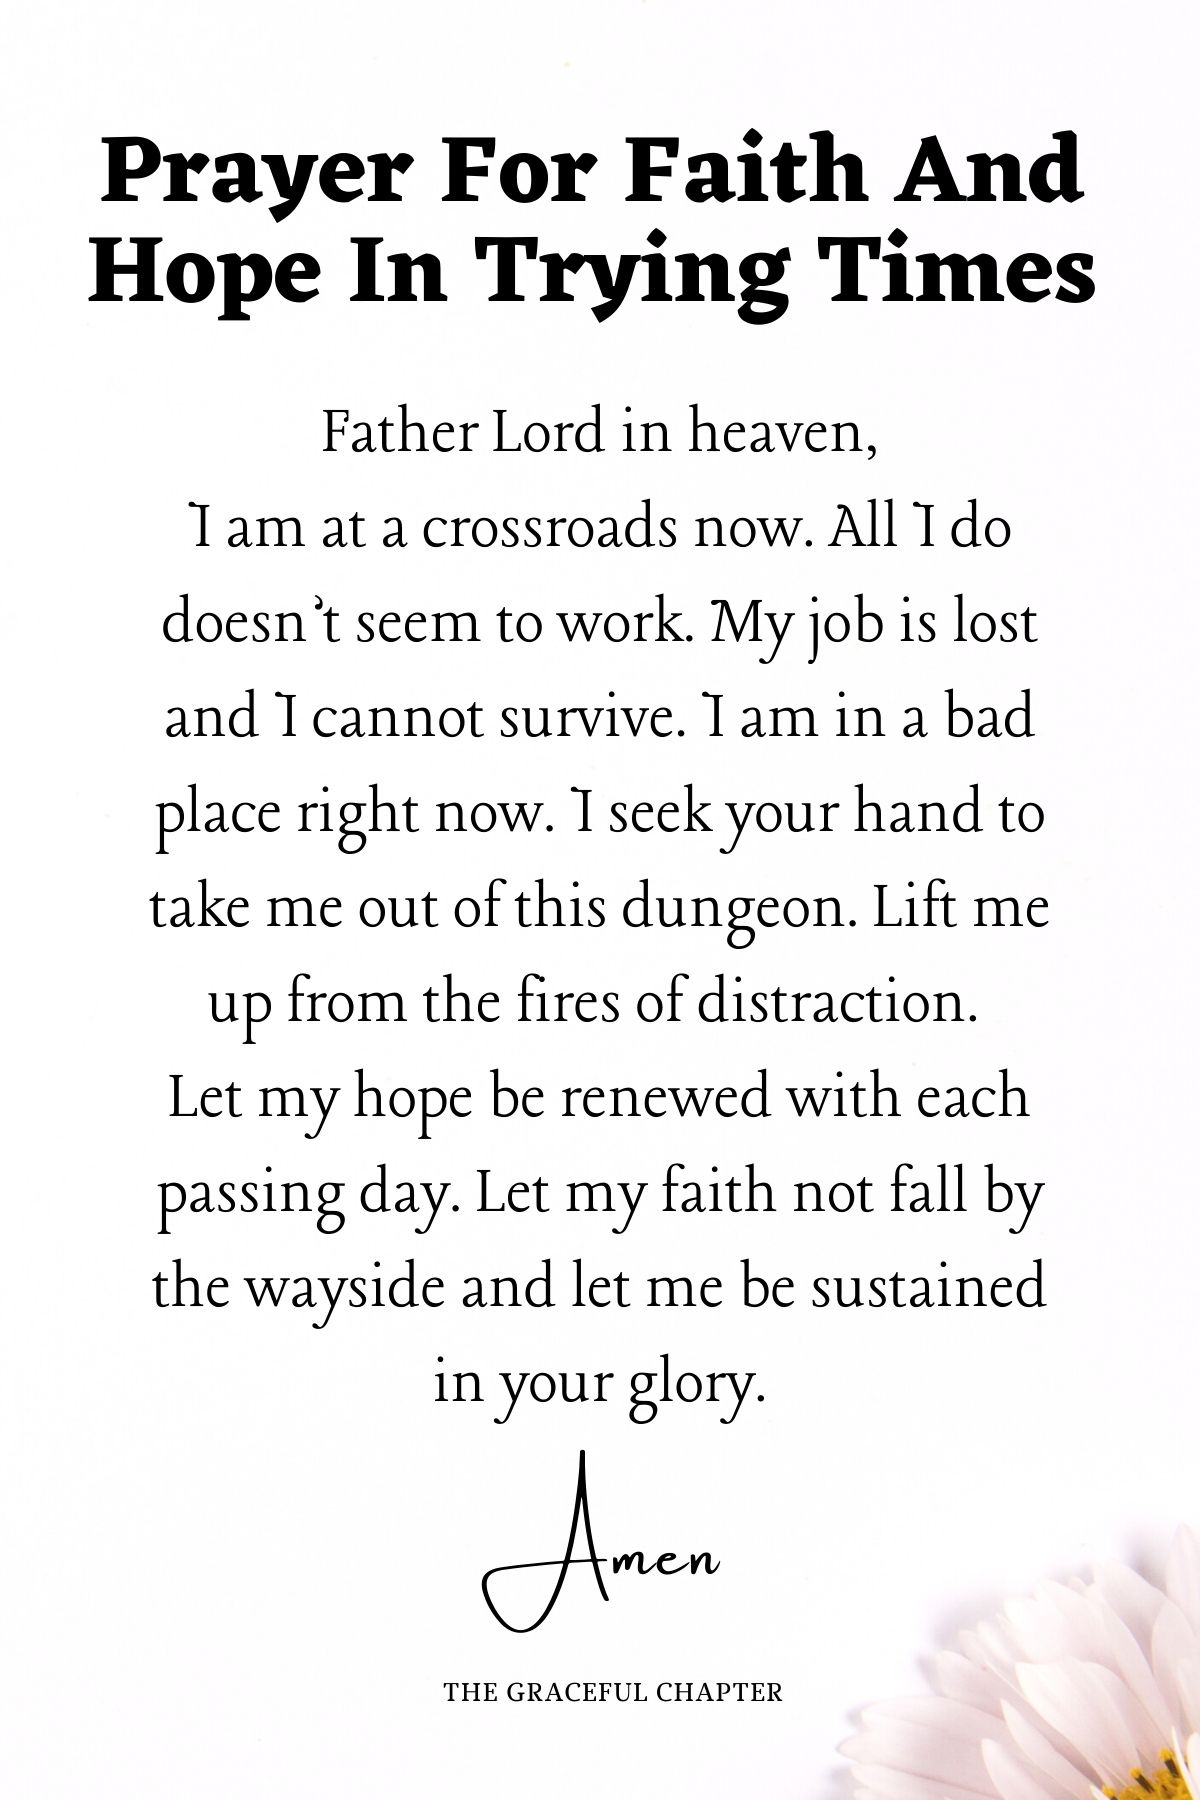 Prayer for faith and hope in trying times